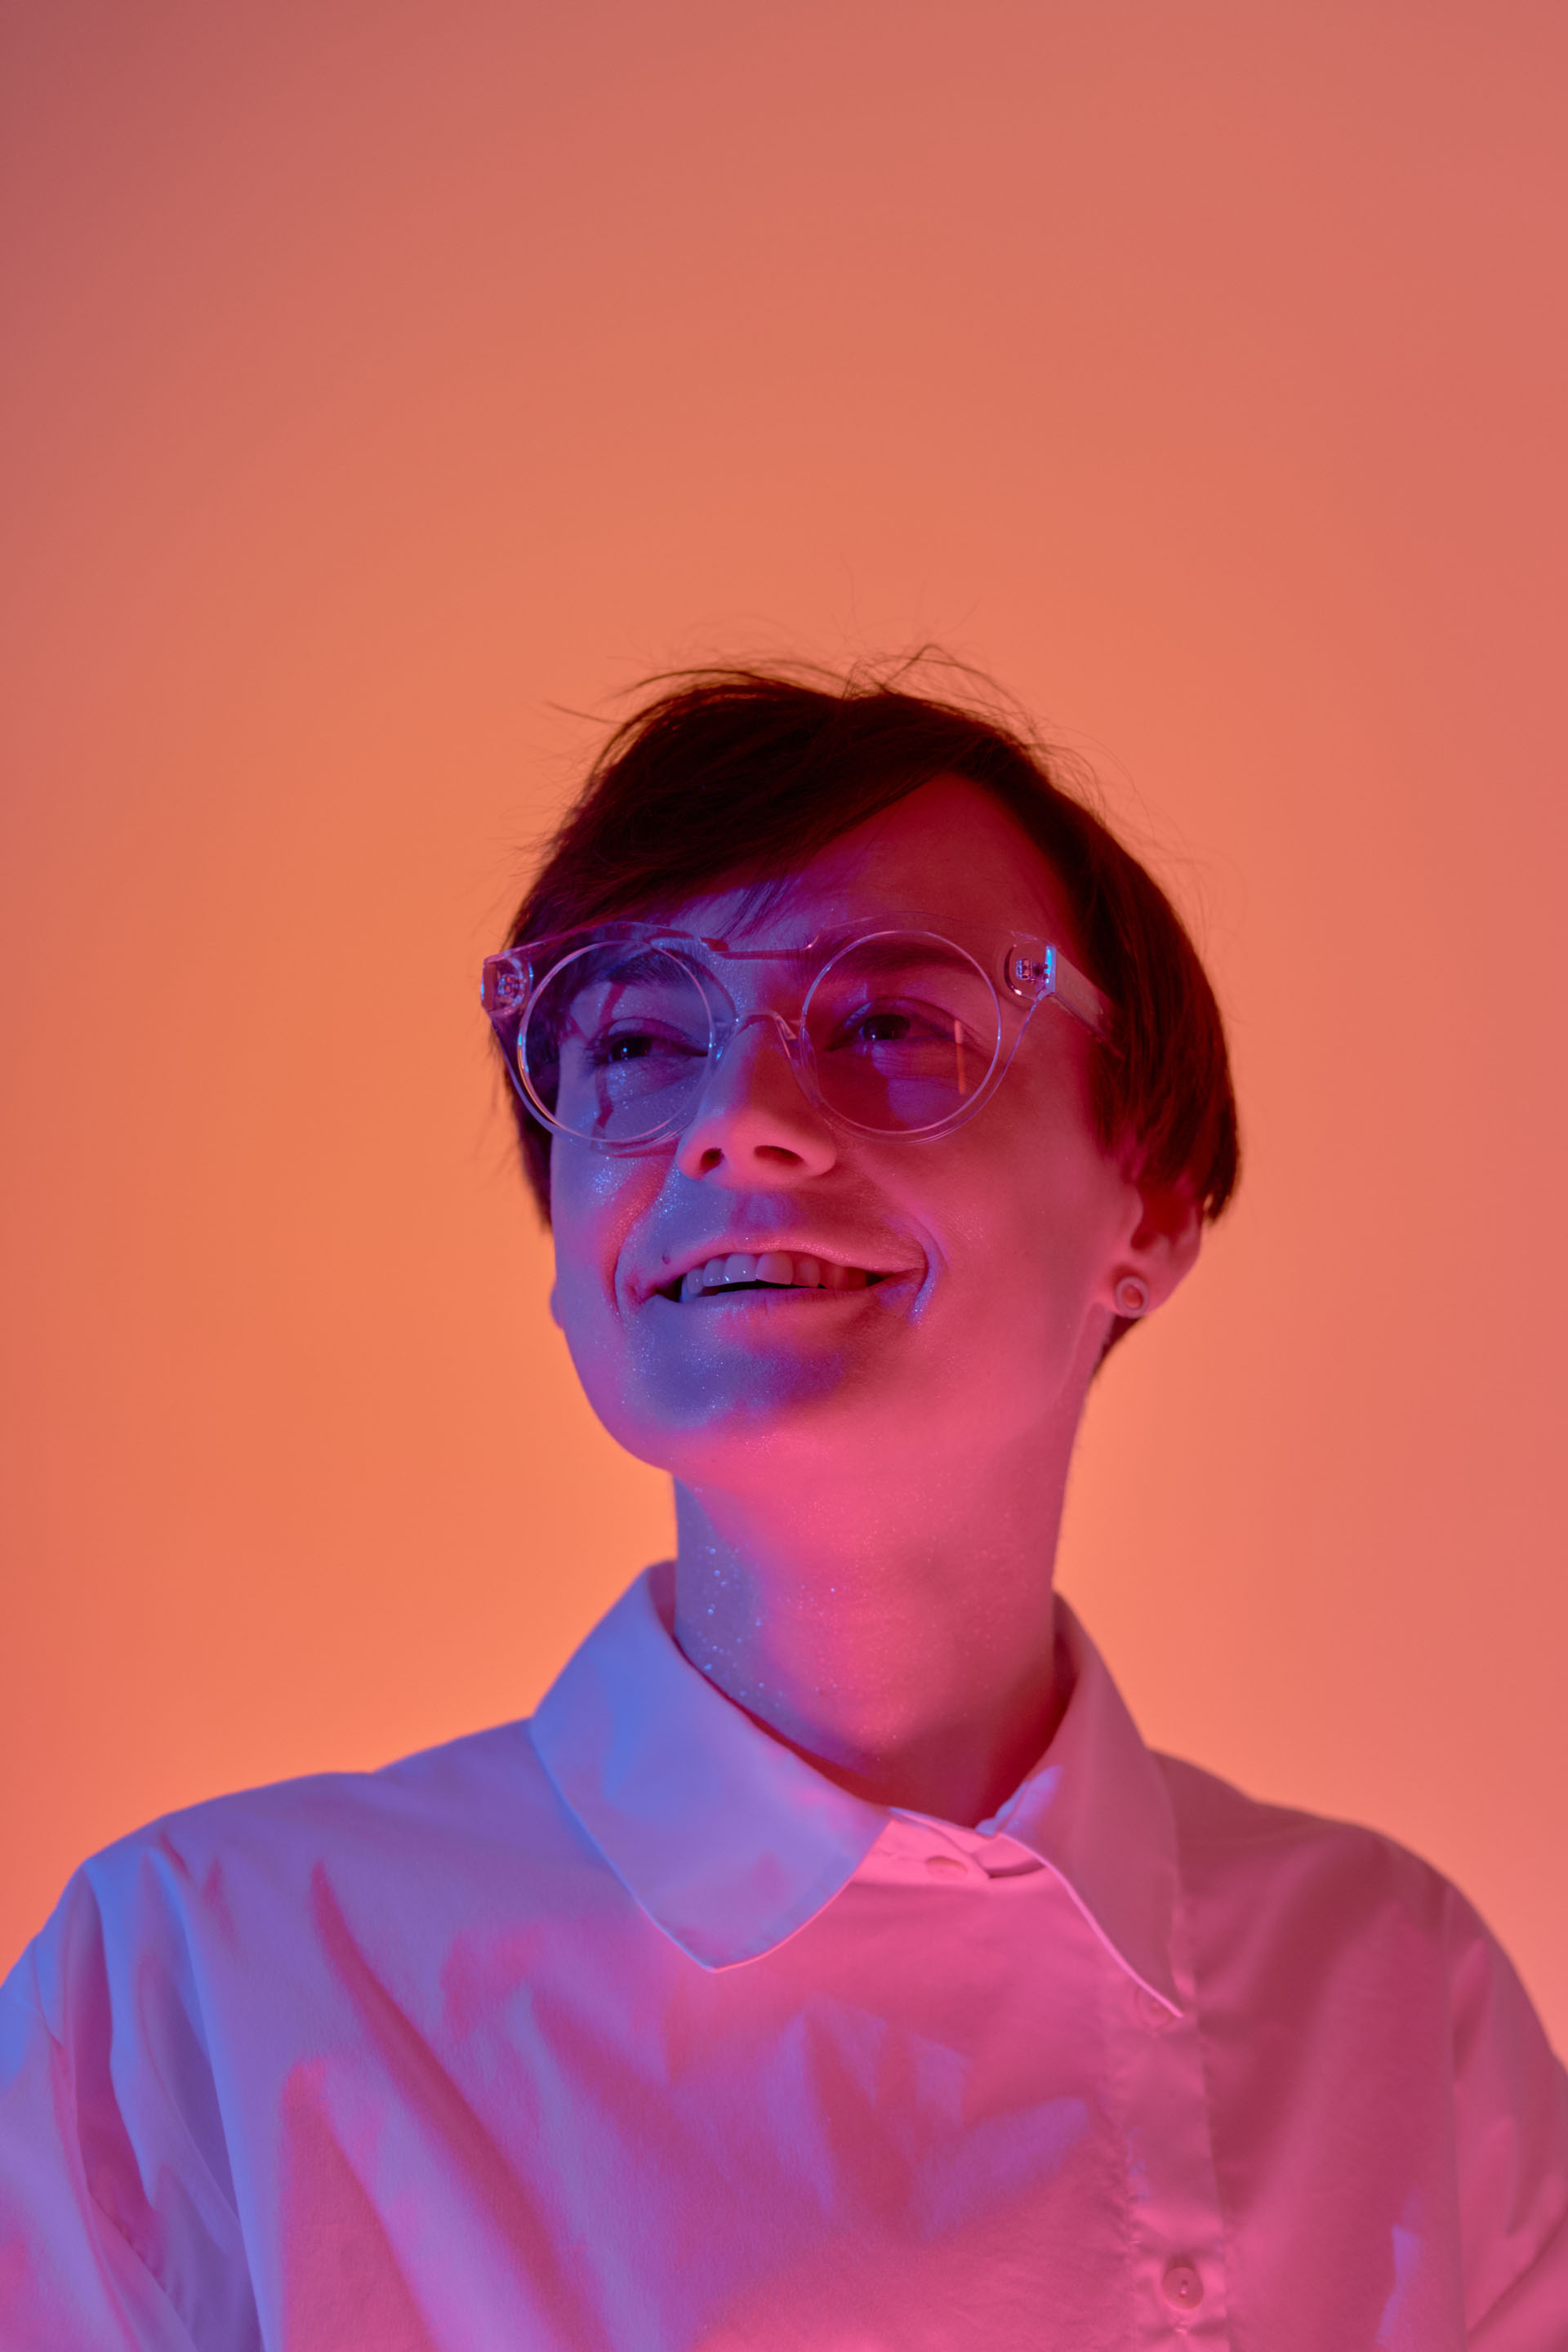 Inspired by space dreams, Maria Teriaeva’s enchanting synth-pop is a soothing balm for strange times